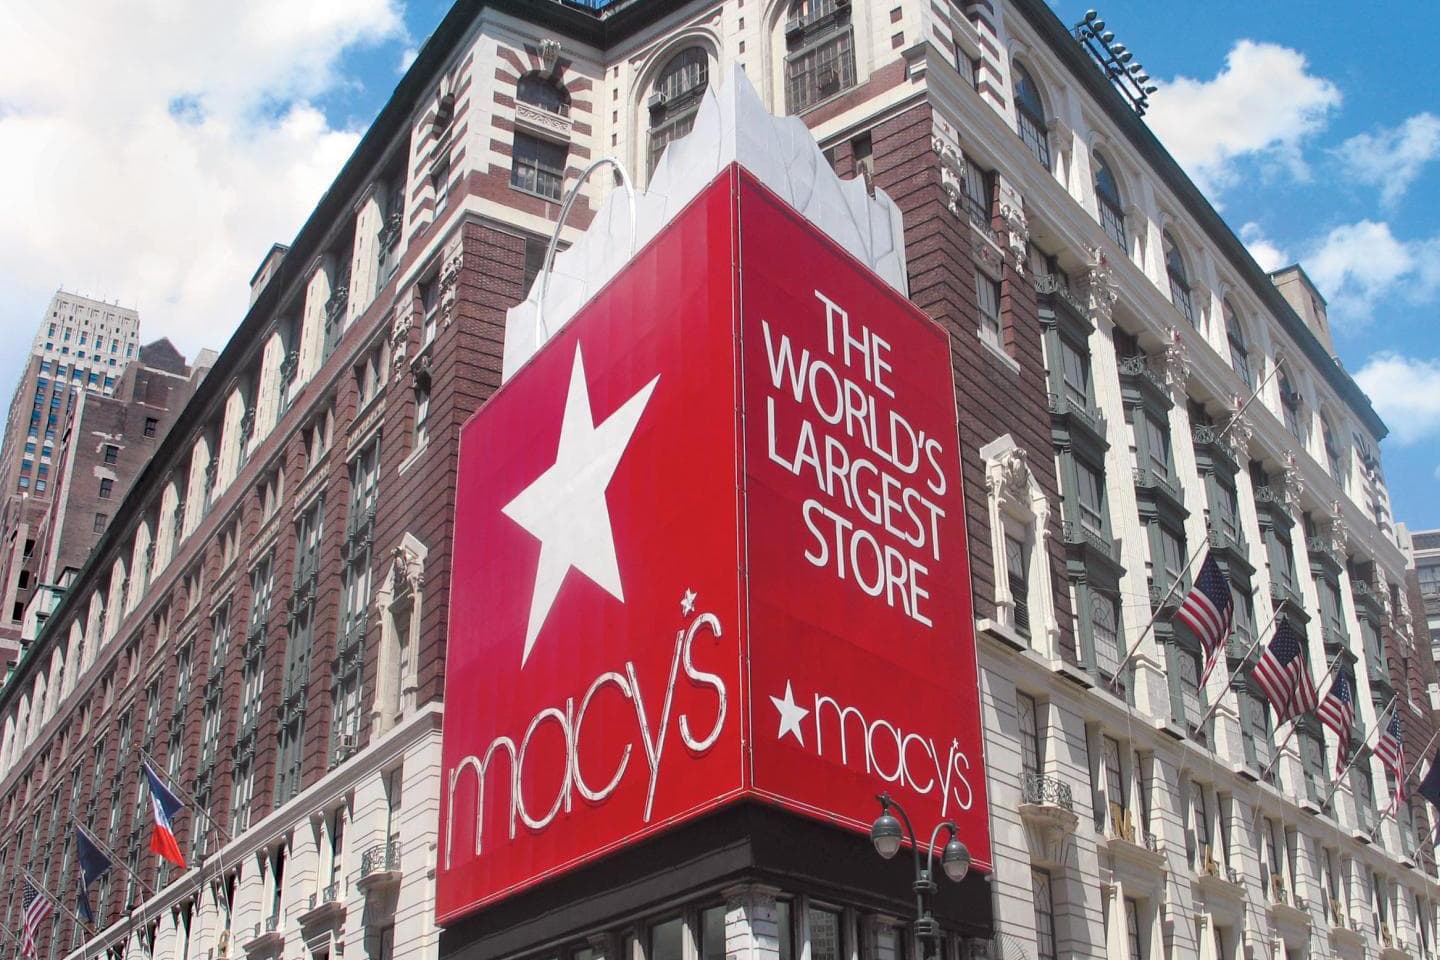 Macy's to cut 2300 jobs news photo of Macy's Herald Square for the Impression